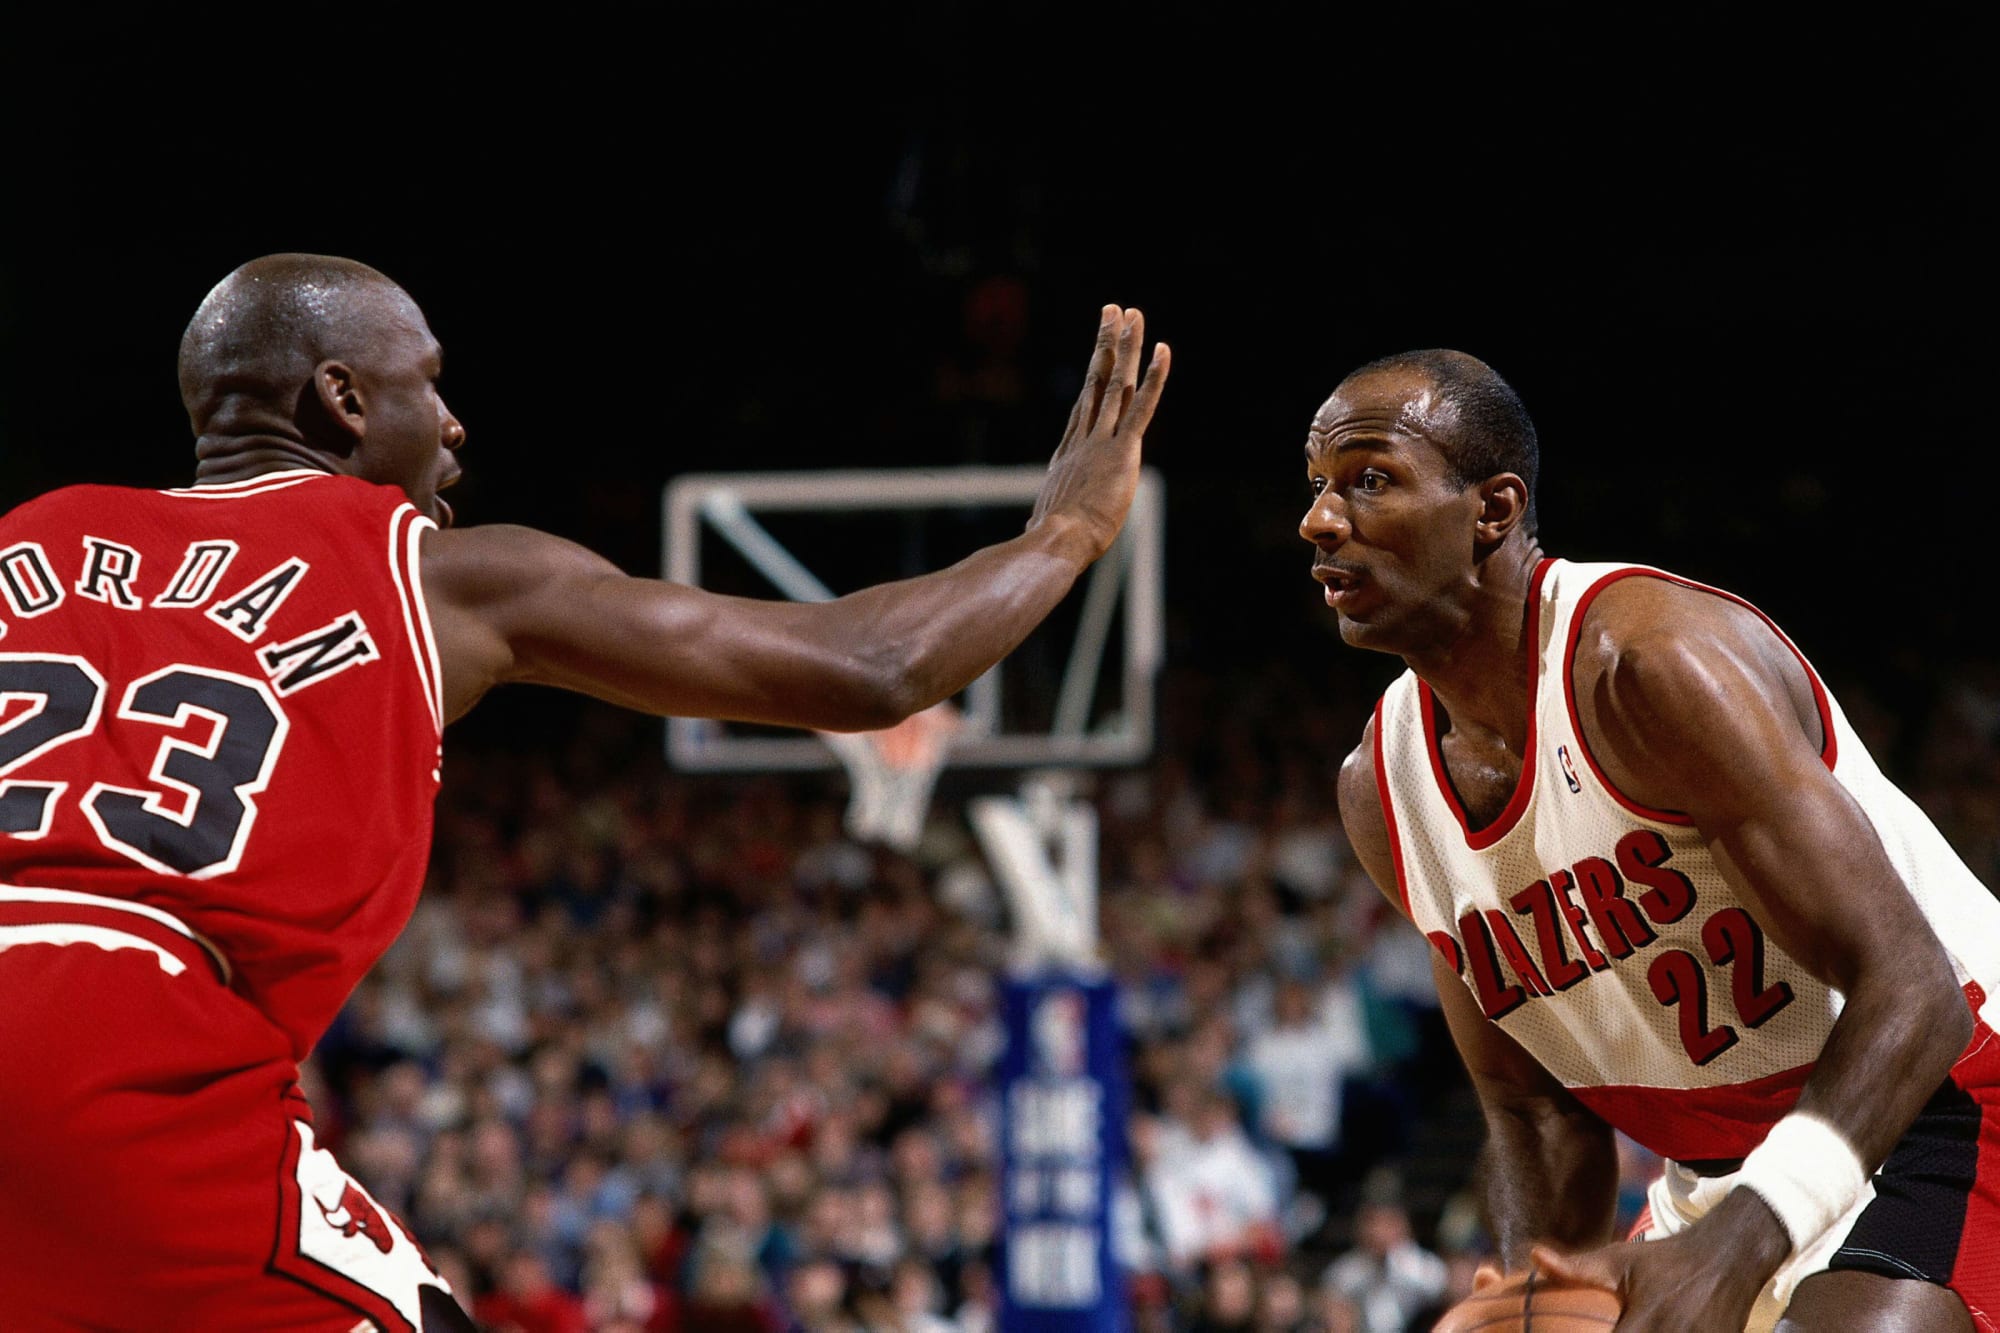 Portland Trail Blazers: Praise MJ and Bulls, Don't discredit Clyde